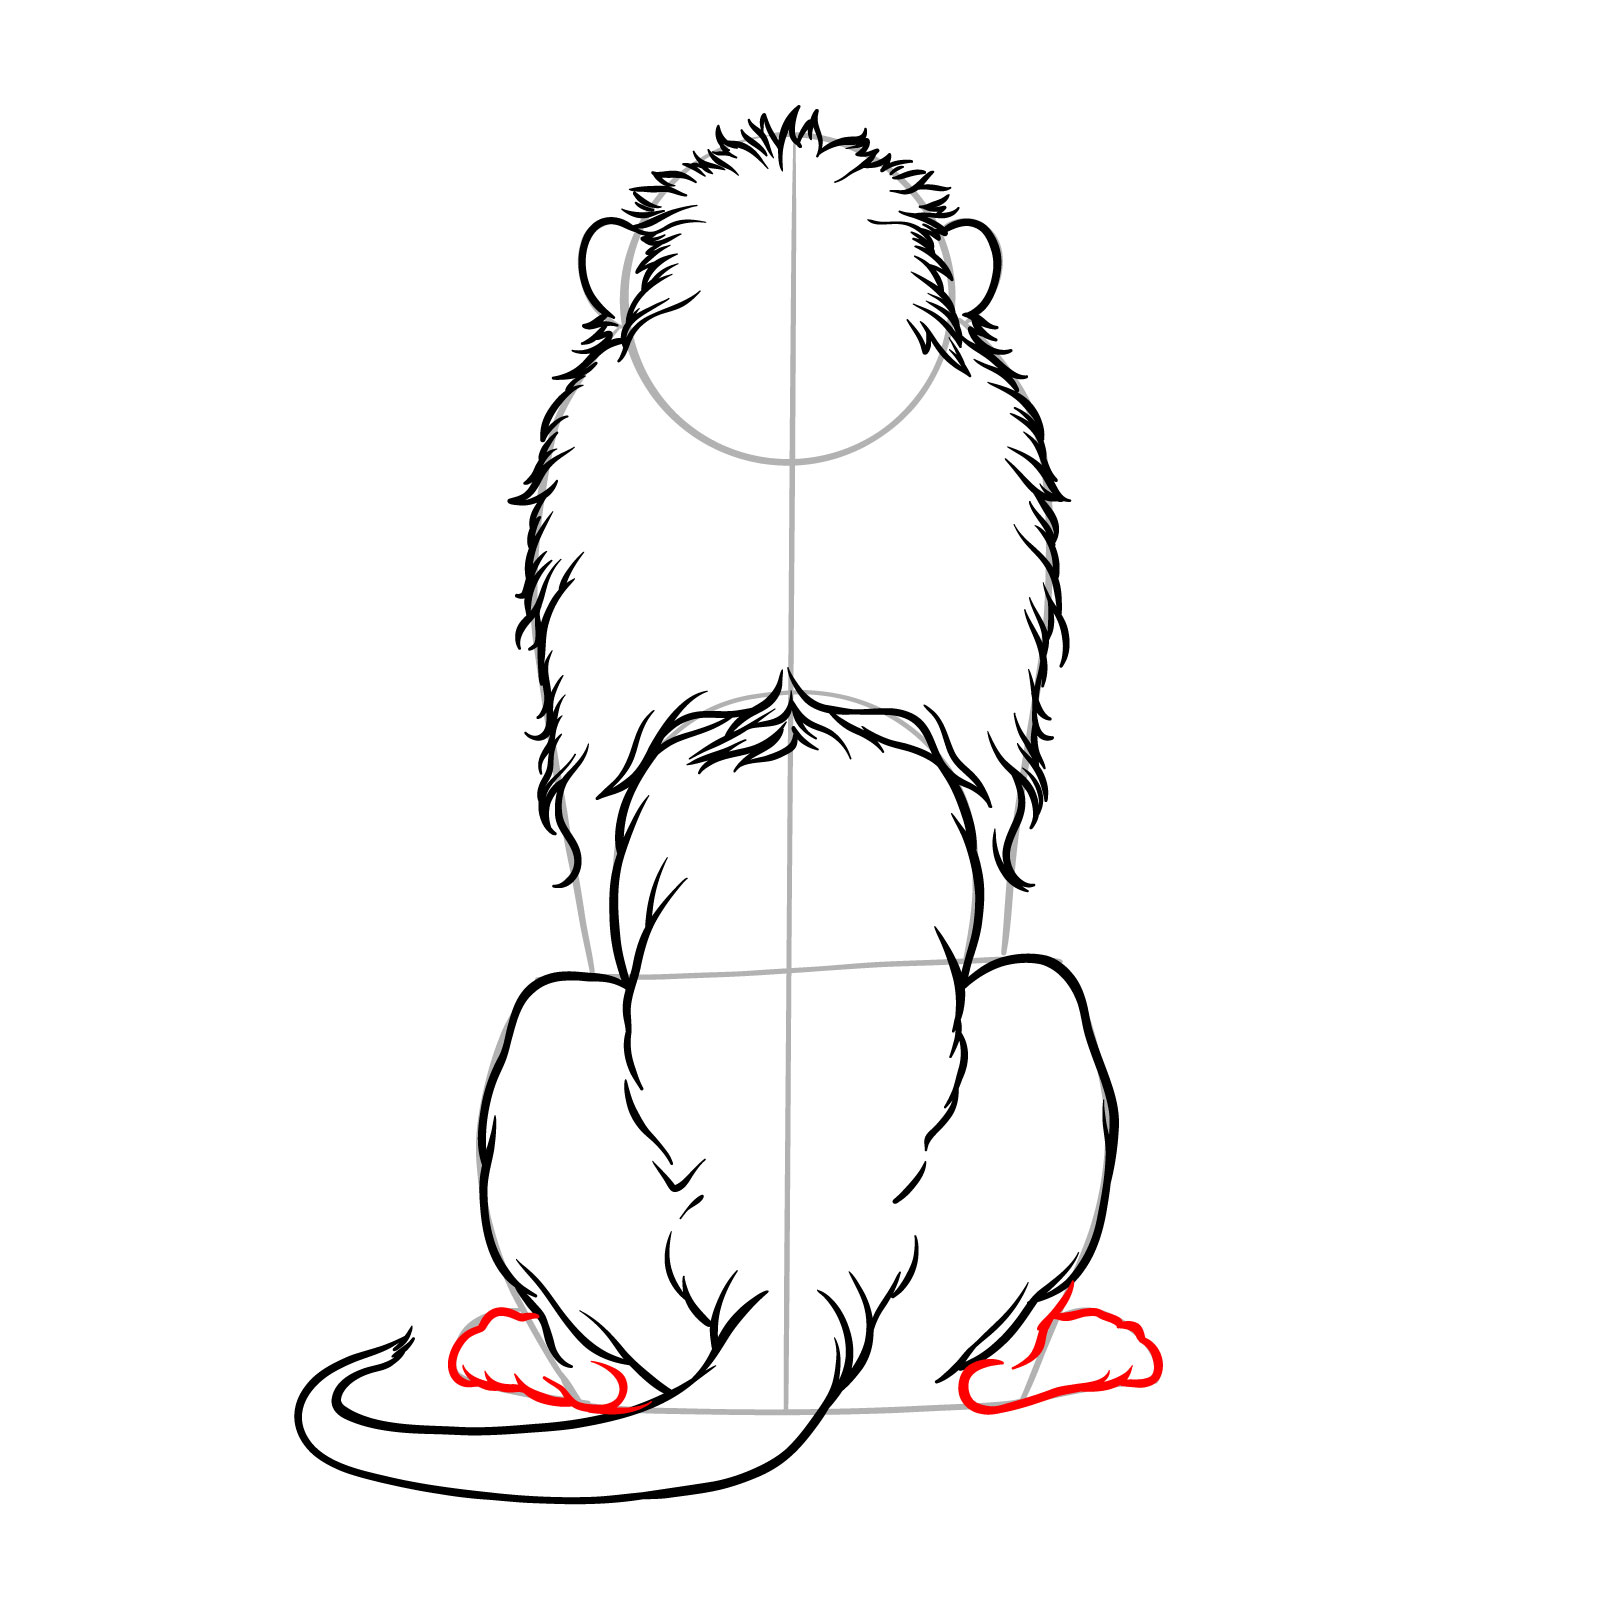 Step 9 in drawing a sitting lion from the back view, completing the rear legs